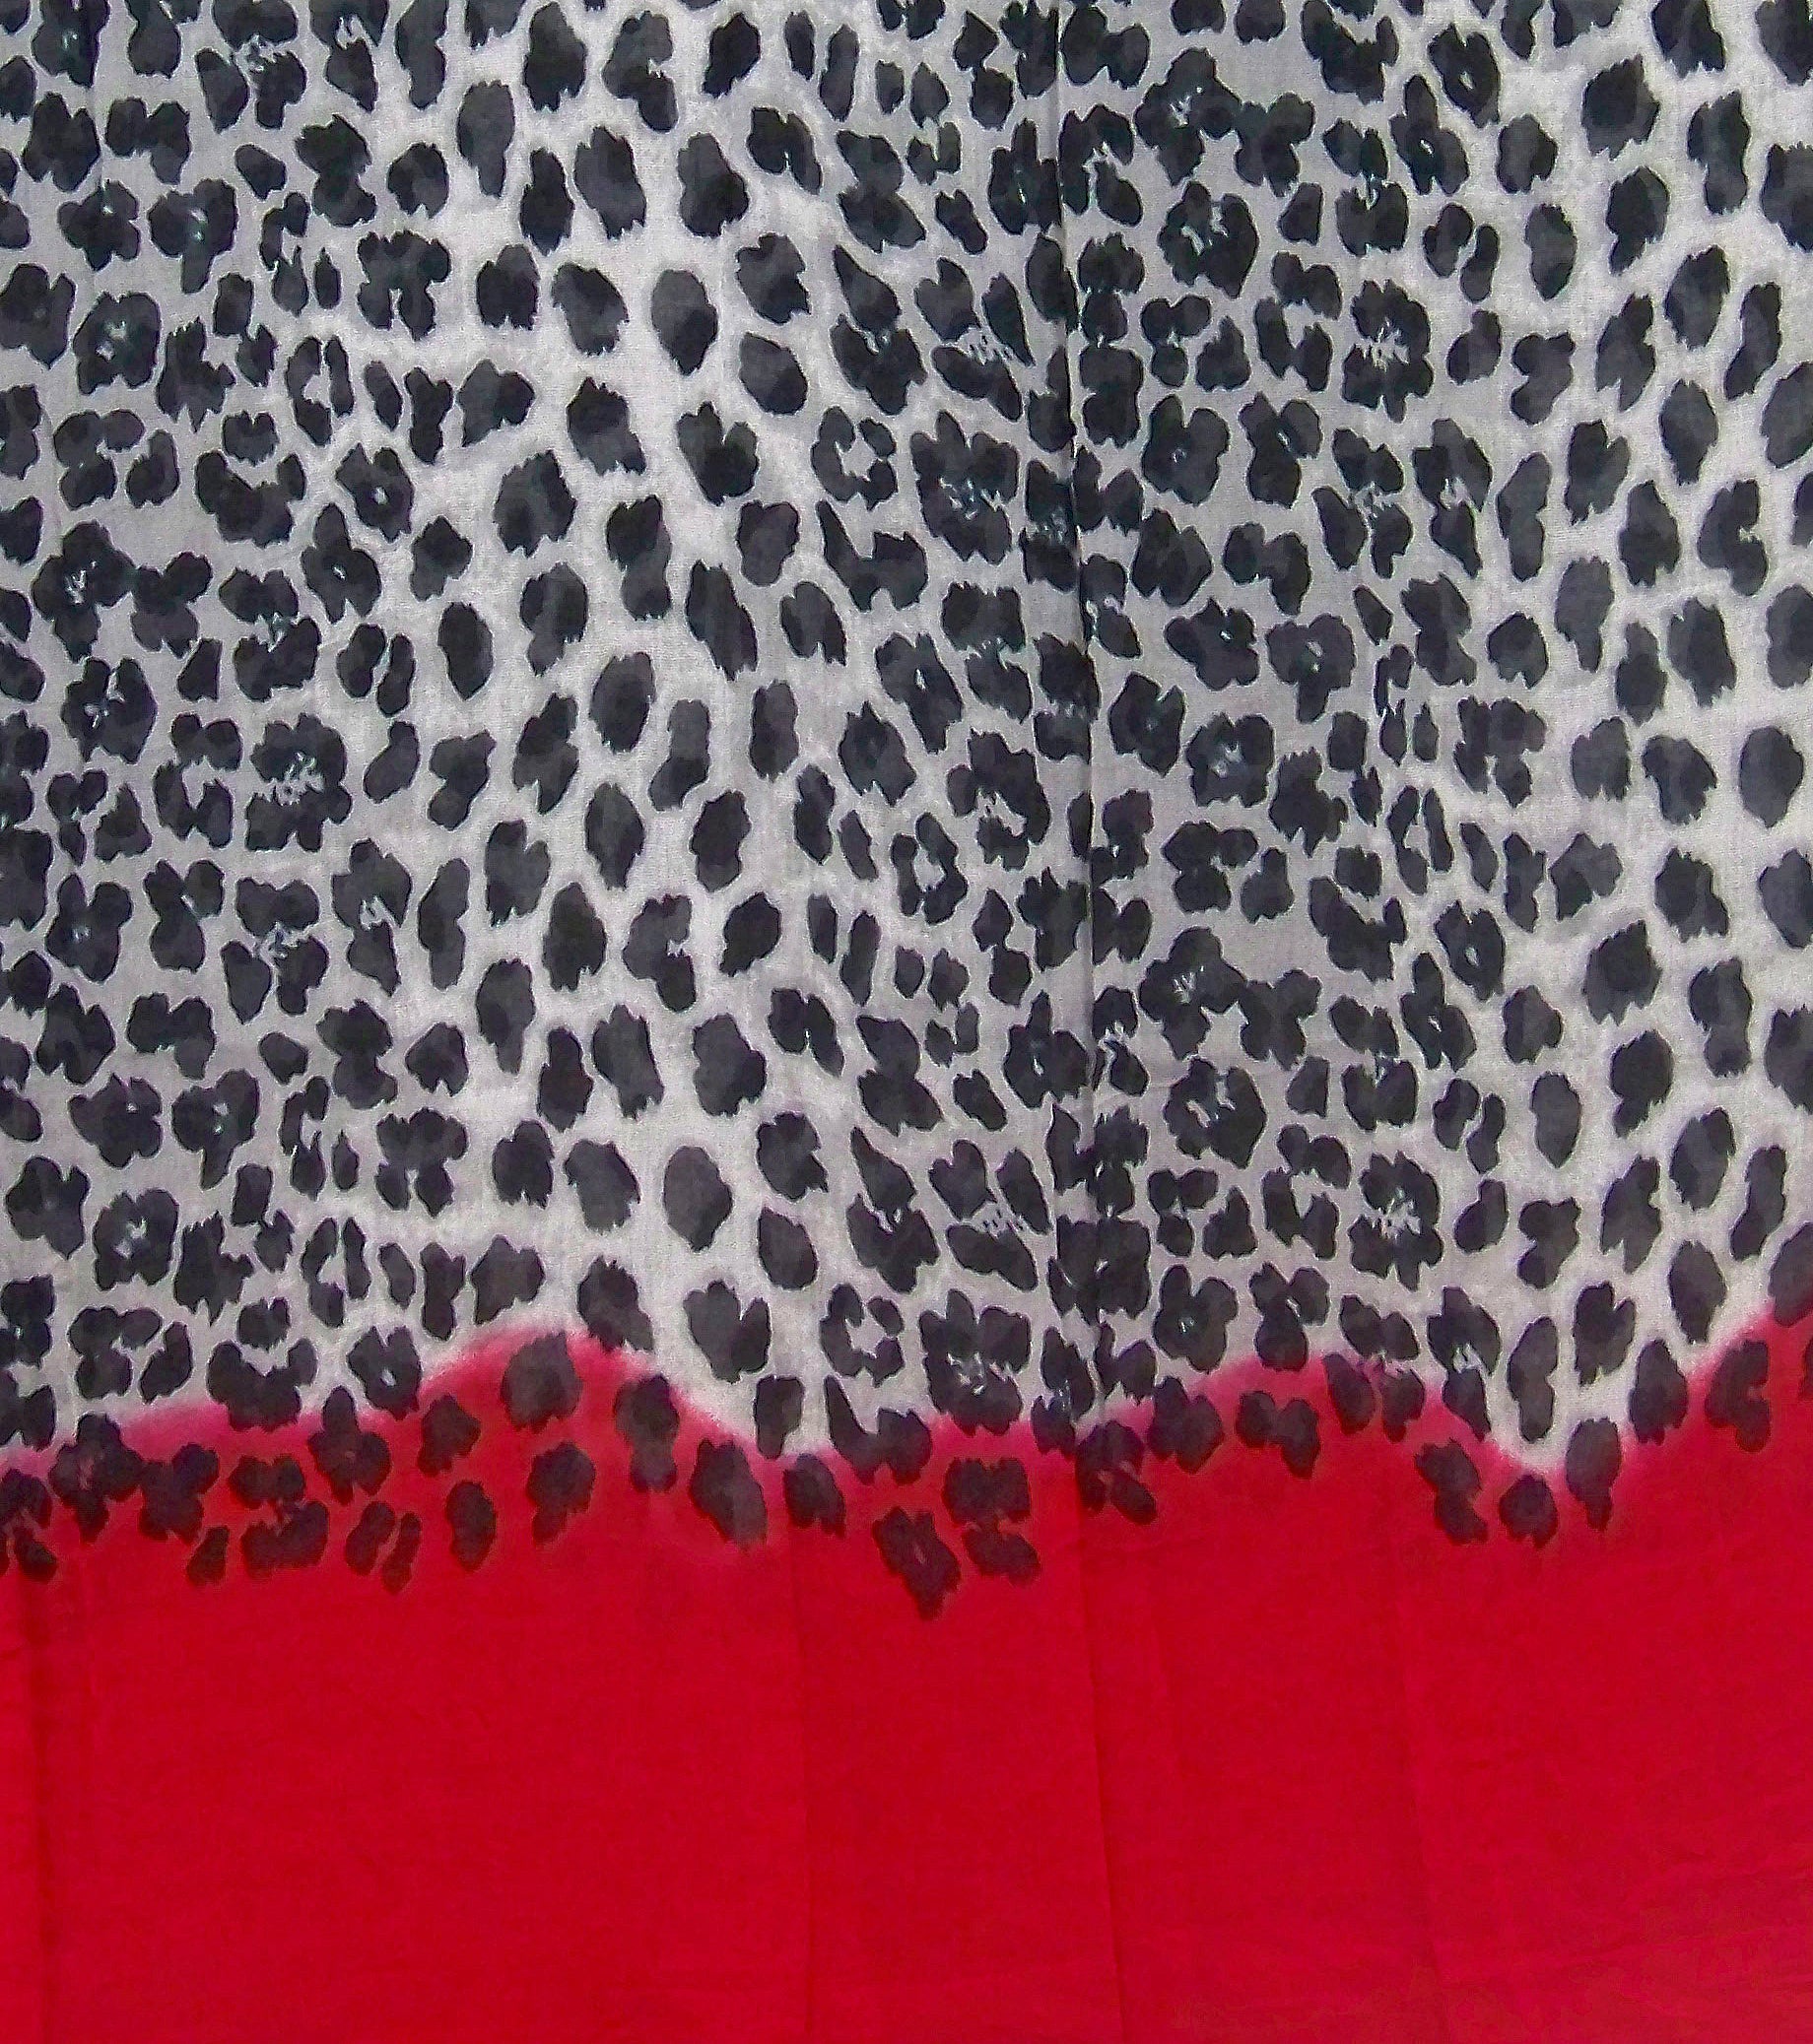 Blue Pacific Animal Print Cashmere Silk Scarf in Red and Snow 78 x 22